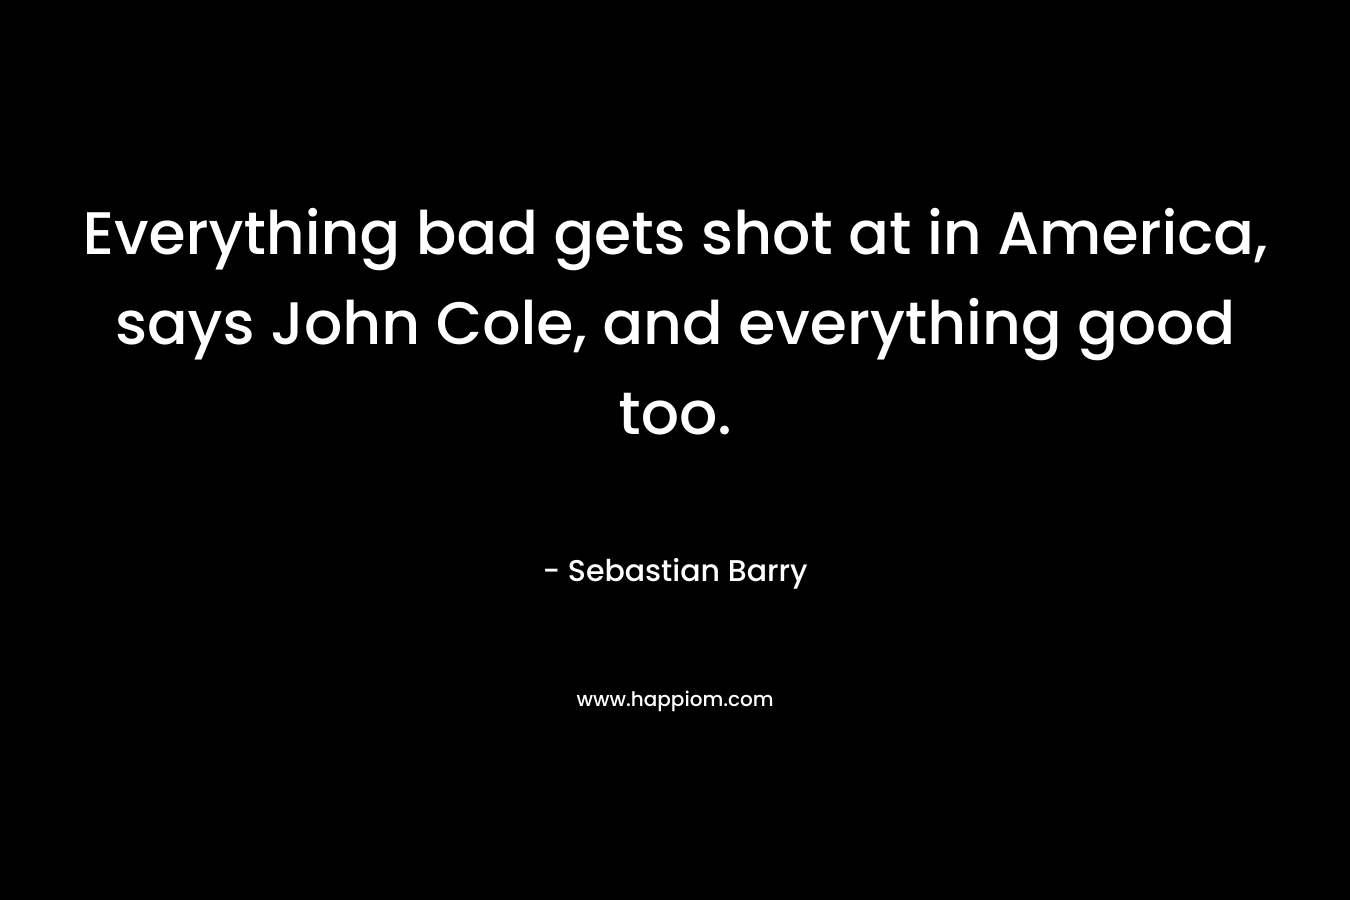 Everything bad gets shot at in America, says John Cole, and everything good too.